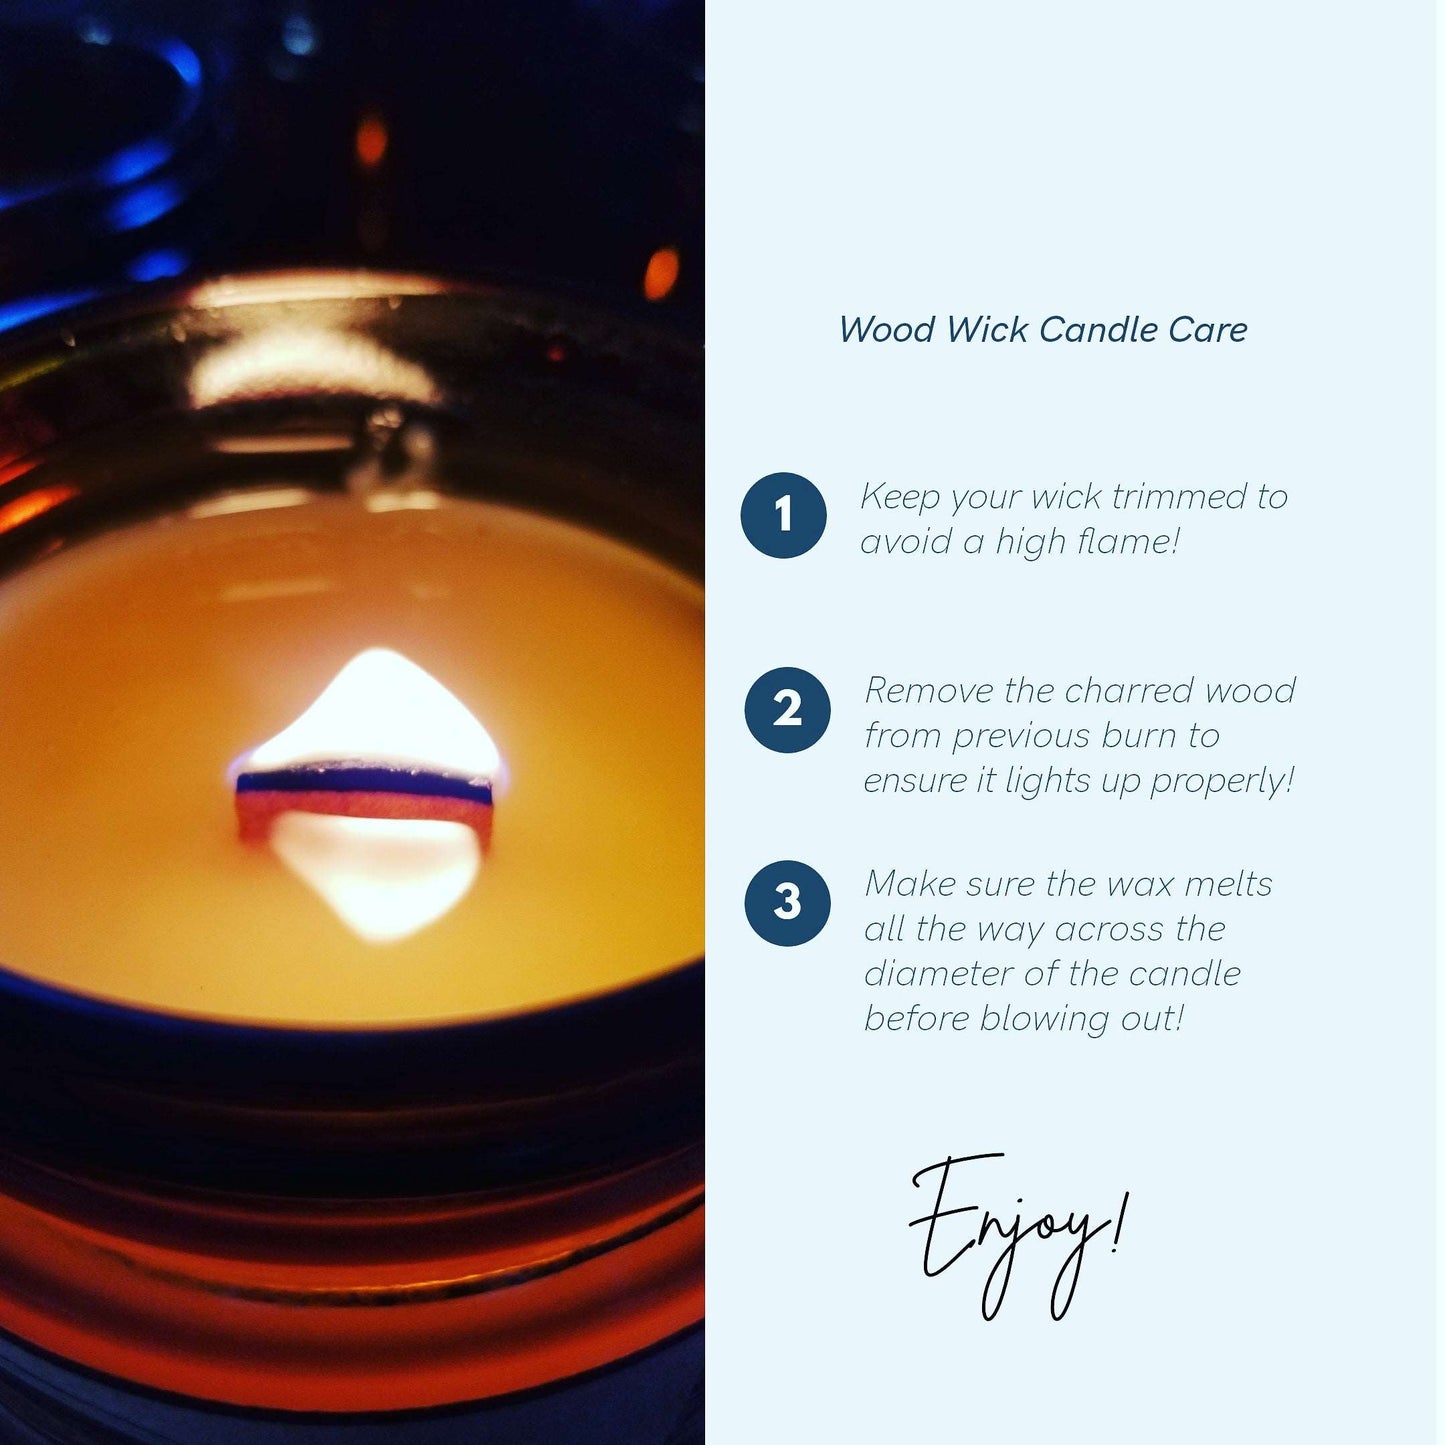 Leave No Trace | Soy Candle with Wooden Wick | Campfire Candles